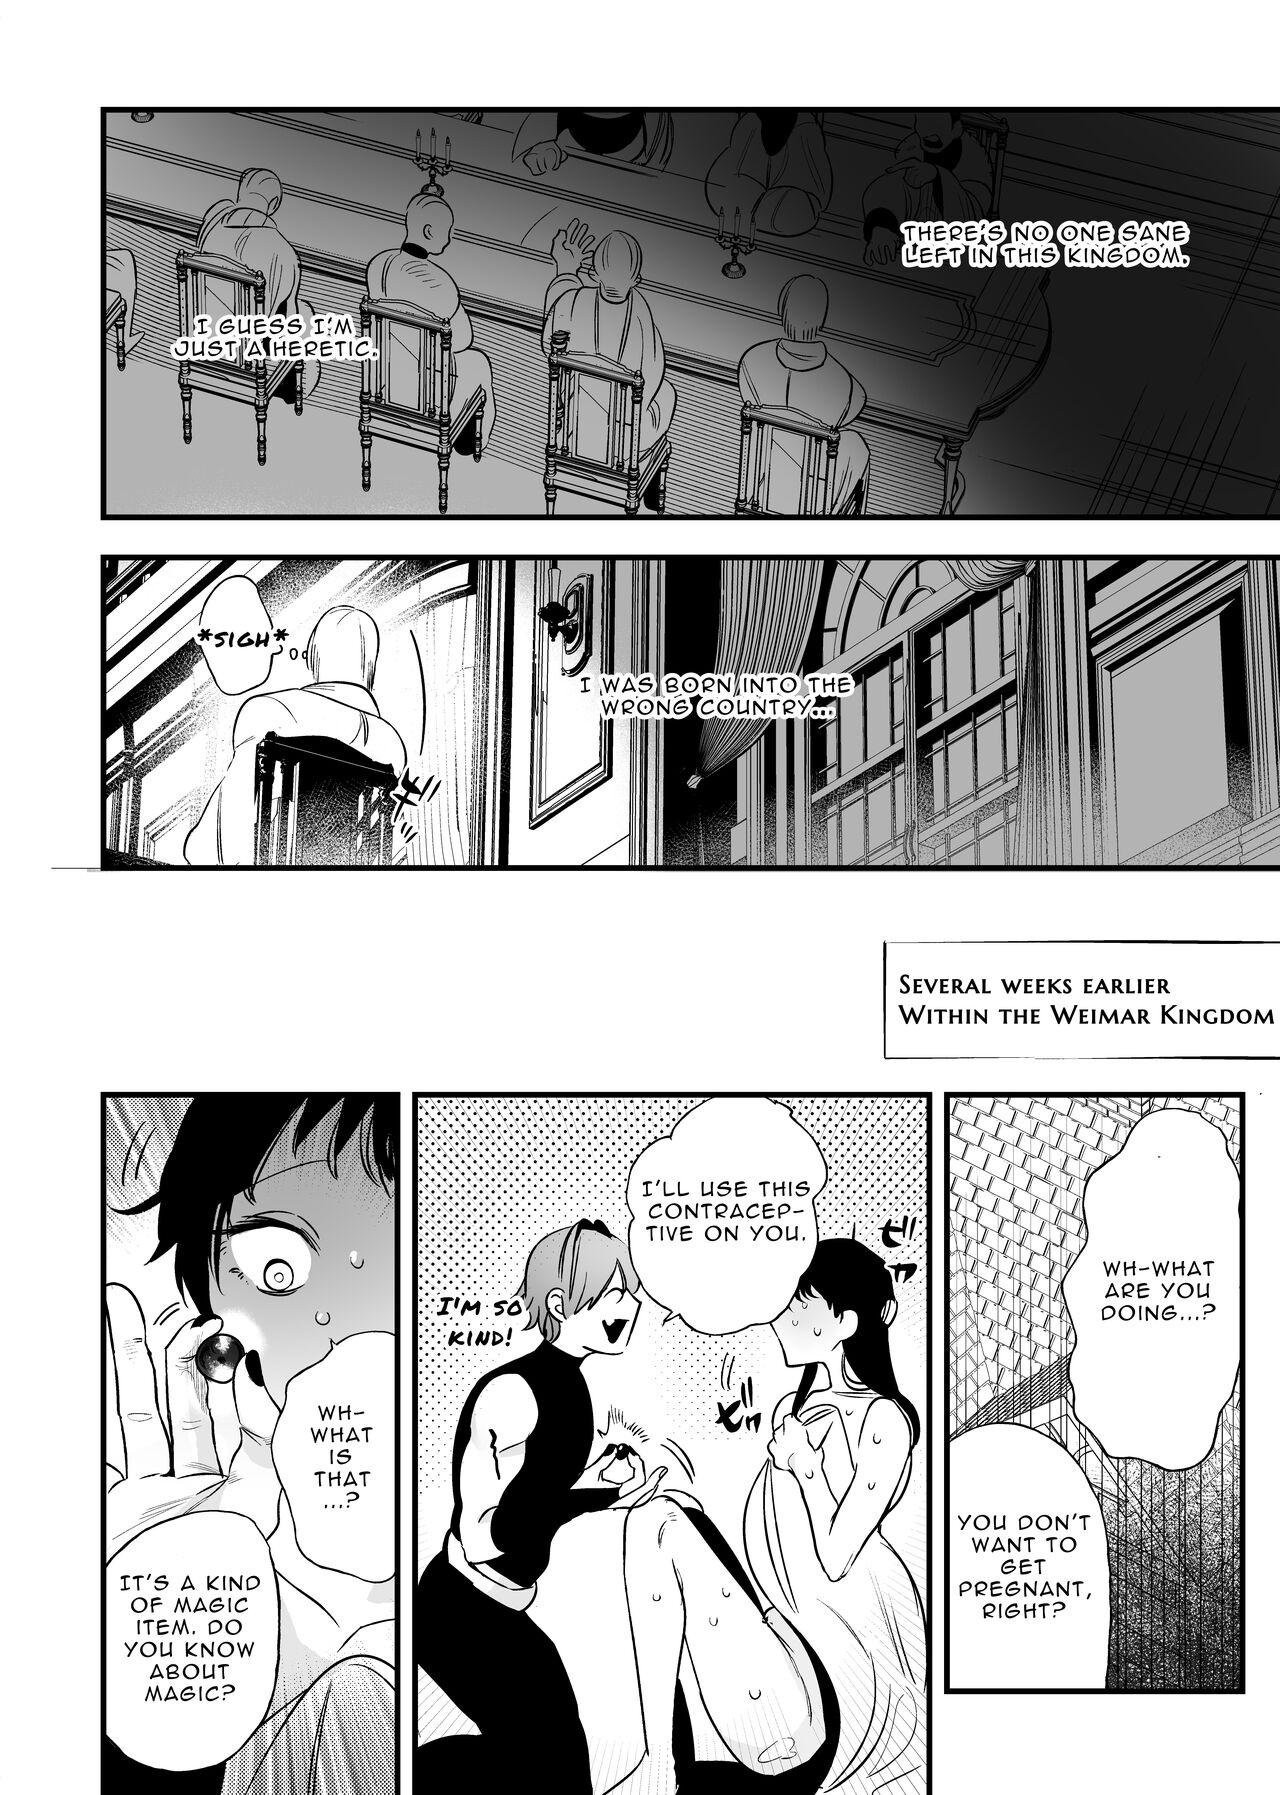 Sex Tape The Man Who Saved Me on my Isekai Trip was a Killer... 2 - Original Pinay - Page 8